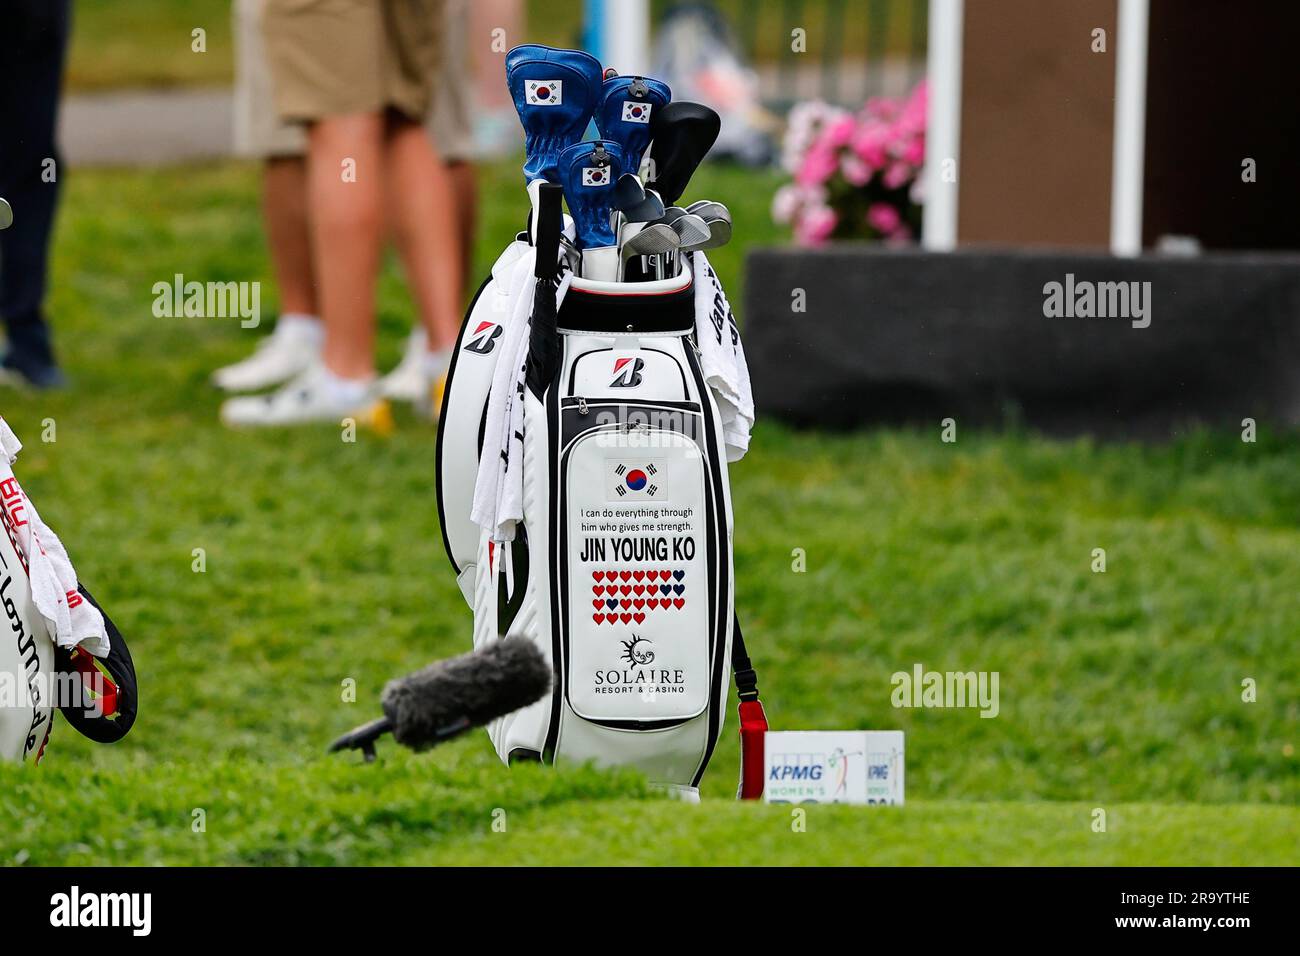 SPRINGFIELD, NJ - JUNE 24: A general view of the golf bag of Jin Young Ko  of South Korea(not pictured) at the 1st tee during the third round of the  LPGA KPMG